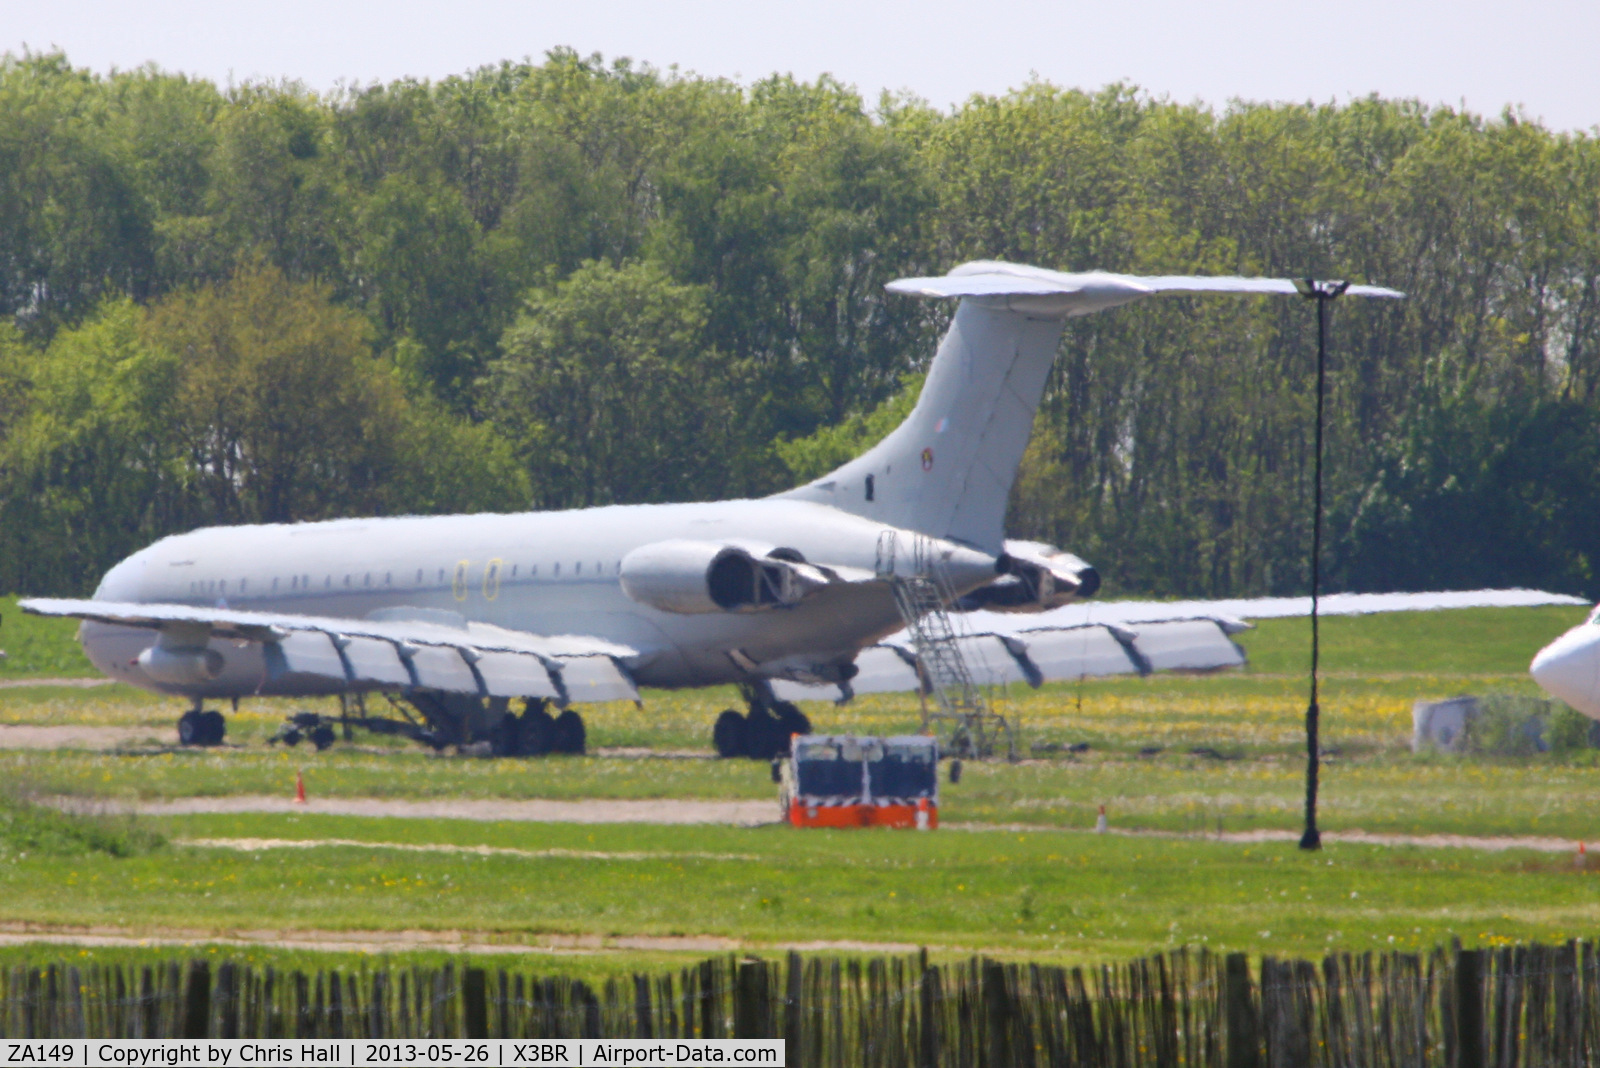 ZA149, 1967 Vickers VC10 K.3 C/N 884, in the scrapping area at Bruntingthorpe